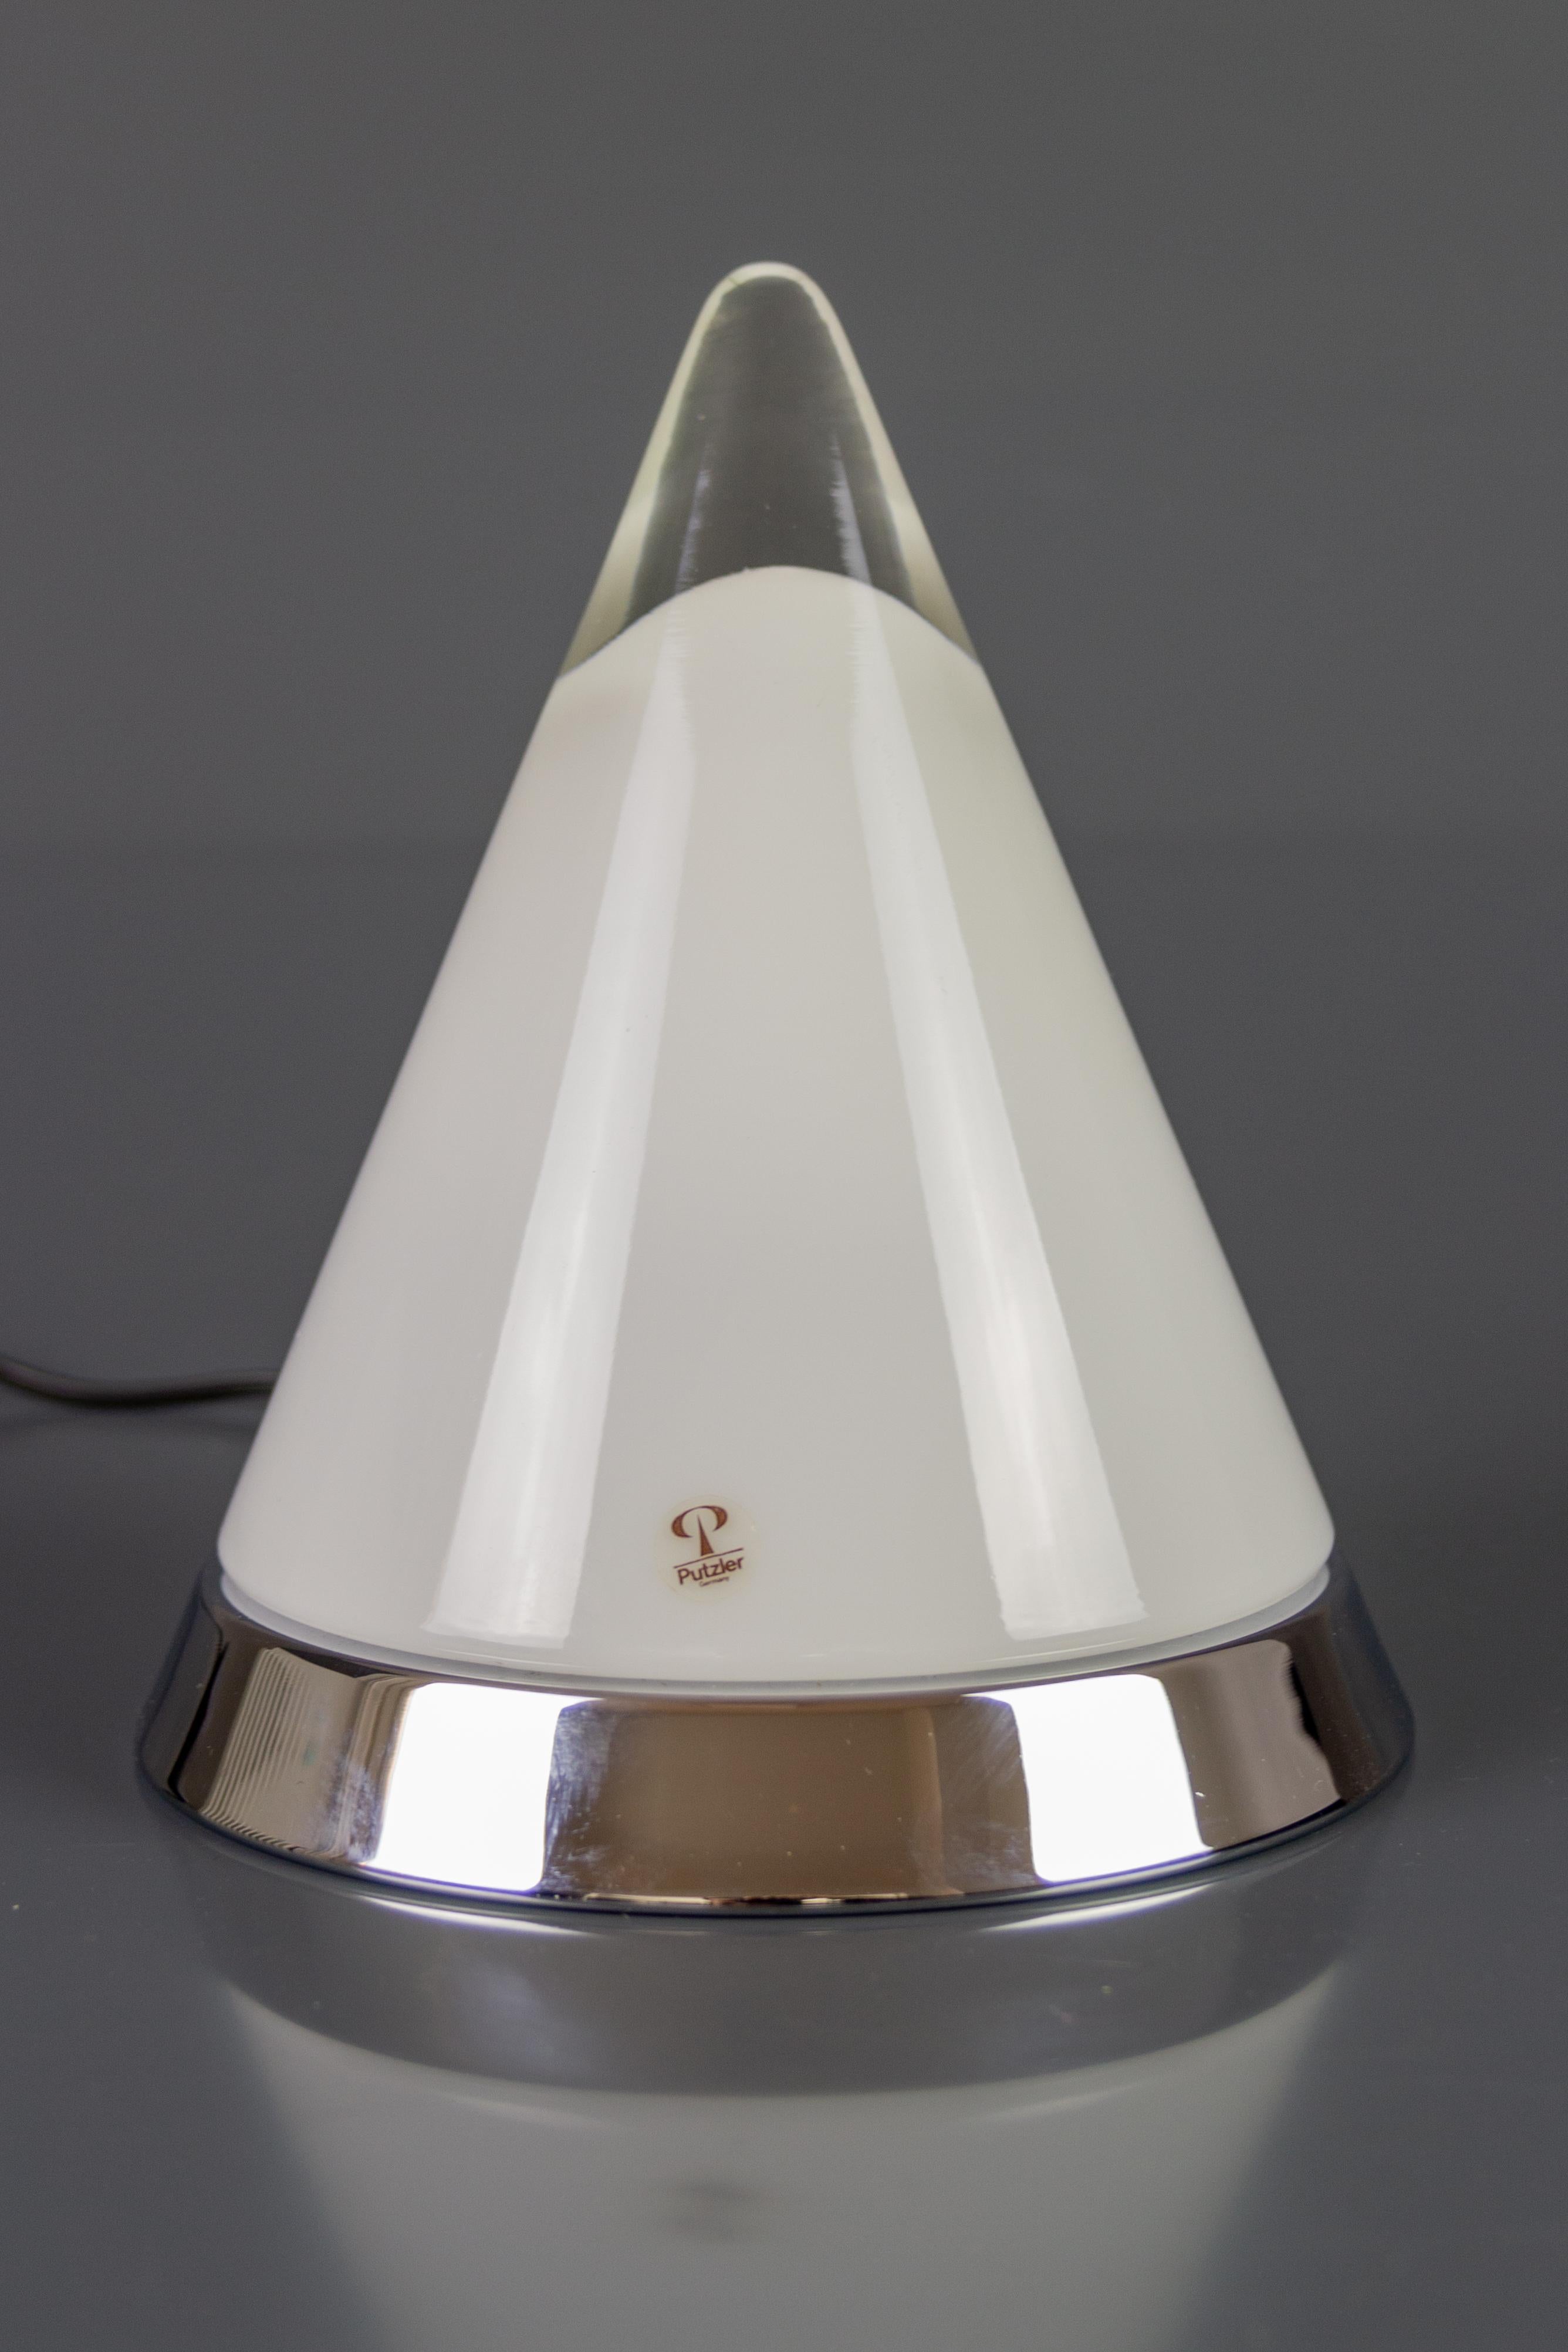 A Peill & Pulzer Kibo model table lamp. The pyramid-shaped lamp features a hand-blown clear and white shining opaline conical glass lampshade ascending to a transparent crystal tip. Round chrome base with a white painted metal holder. 
Dimensions: